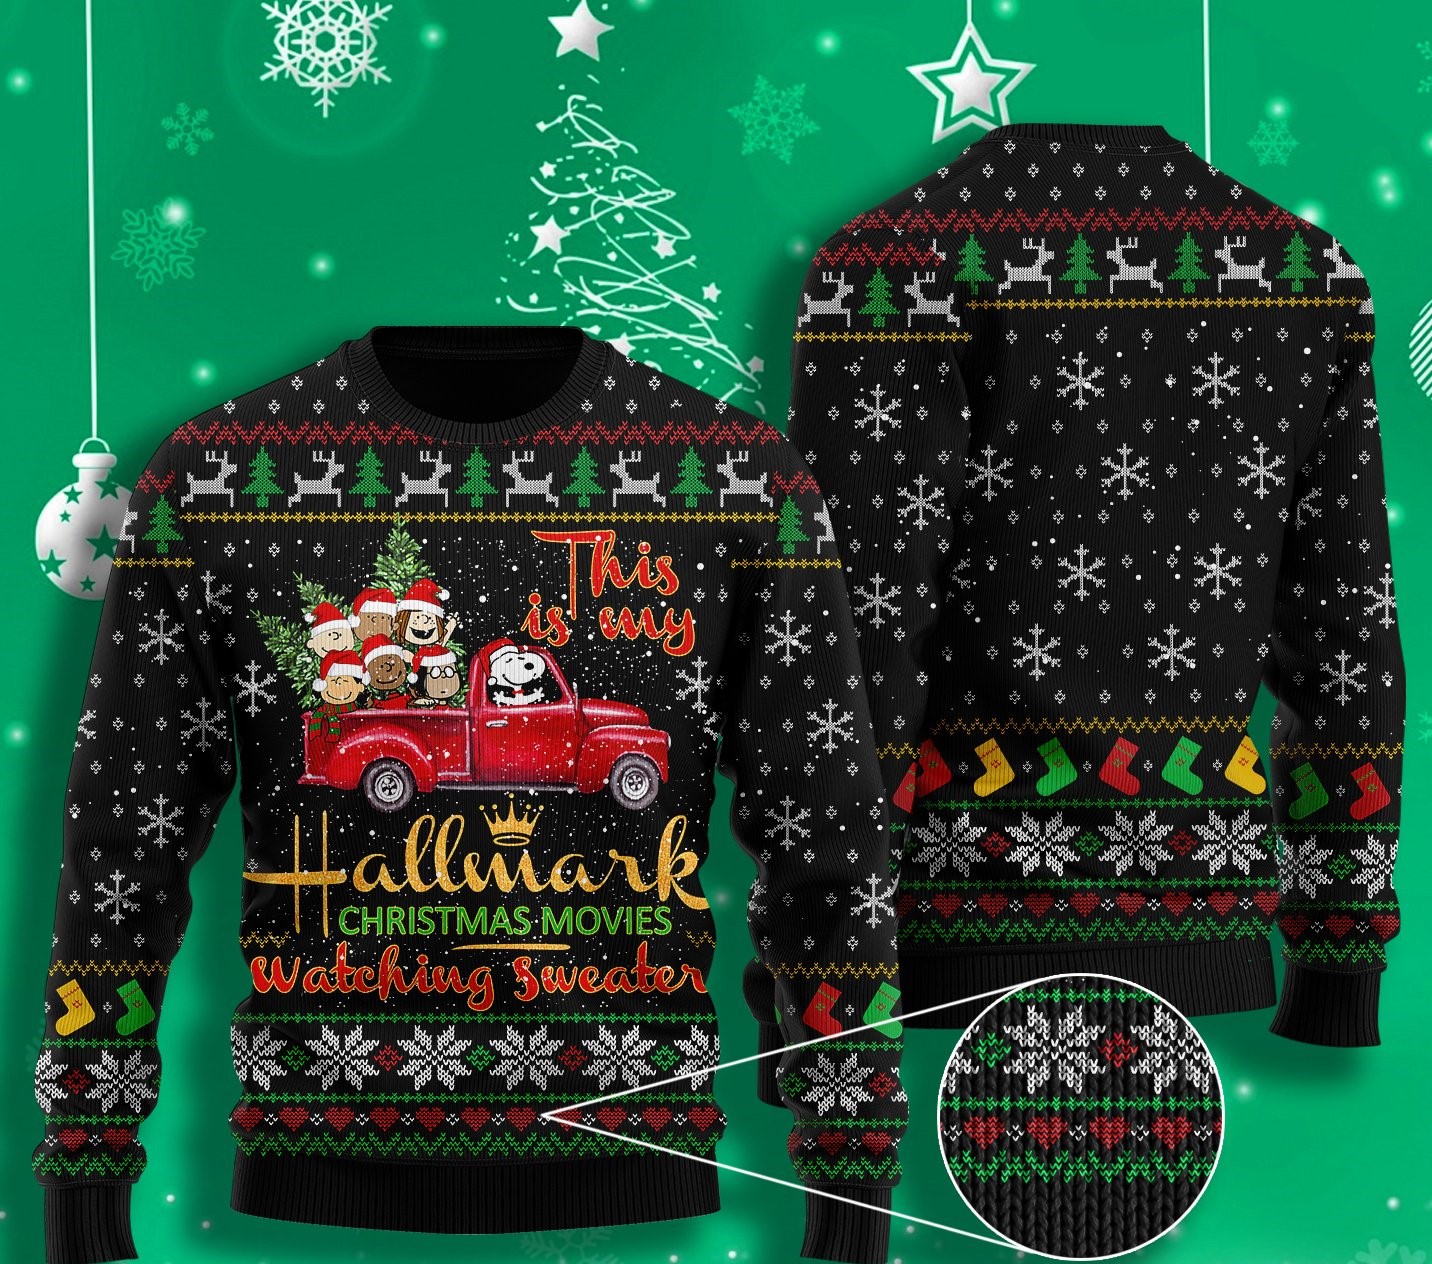 snoopy this is my hallmark christmas movie watching ugly christmas sweater 2 - Copy